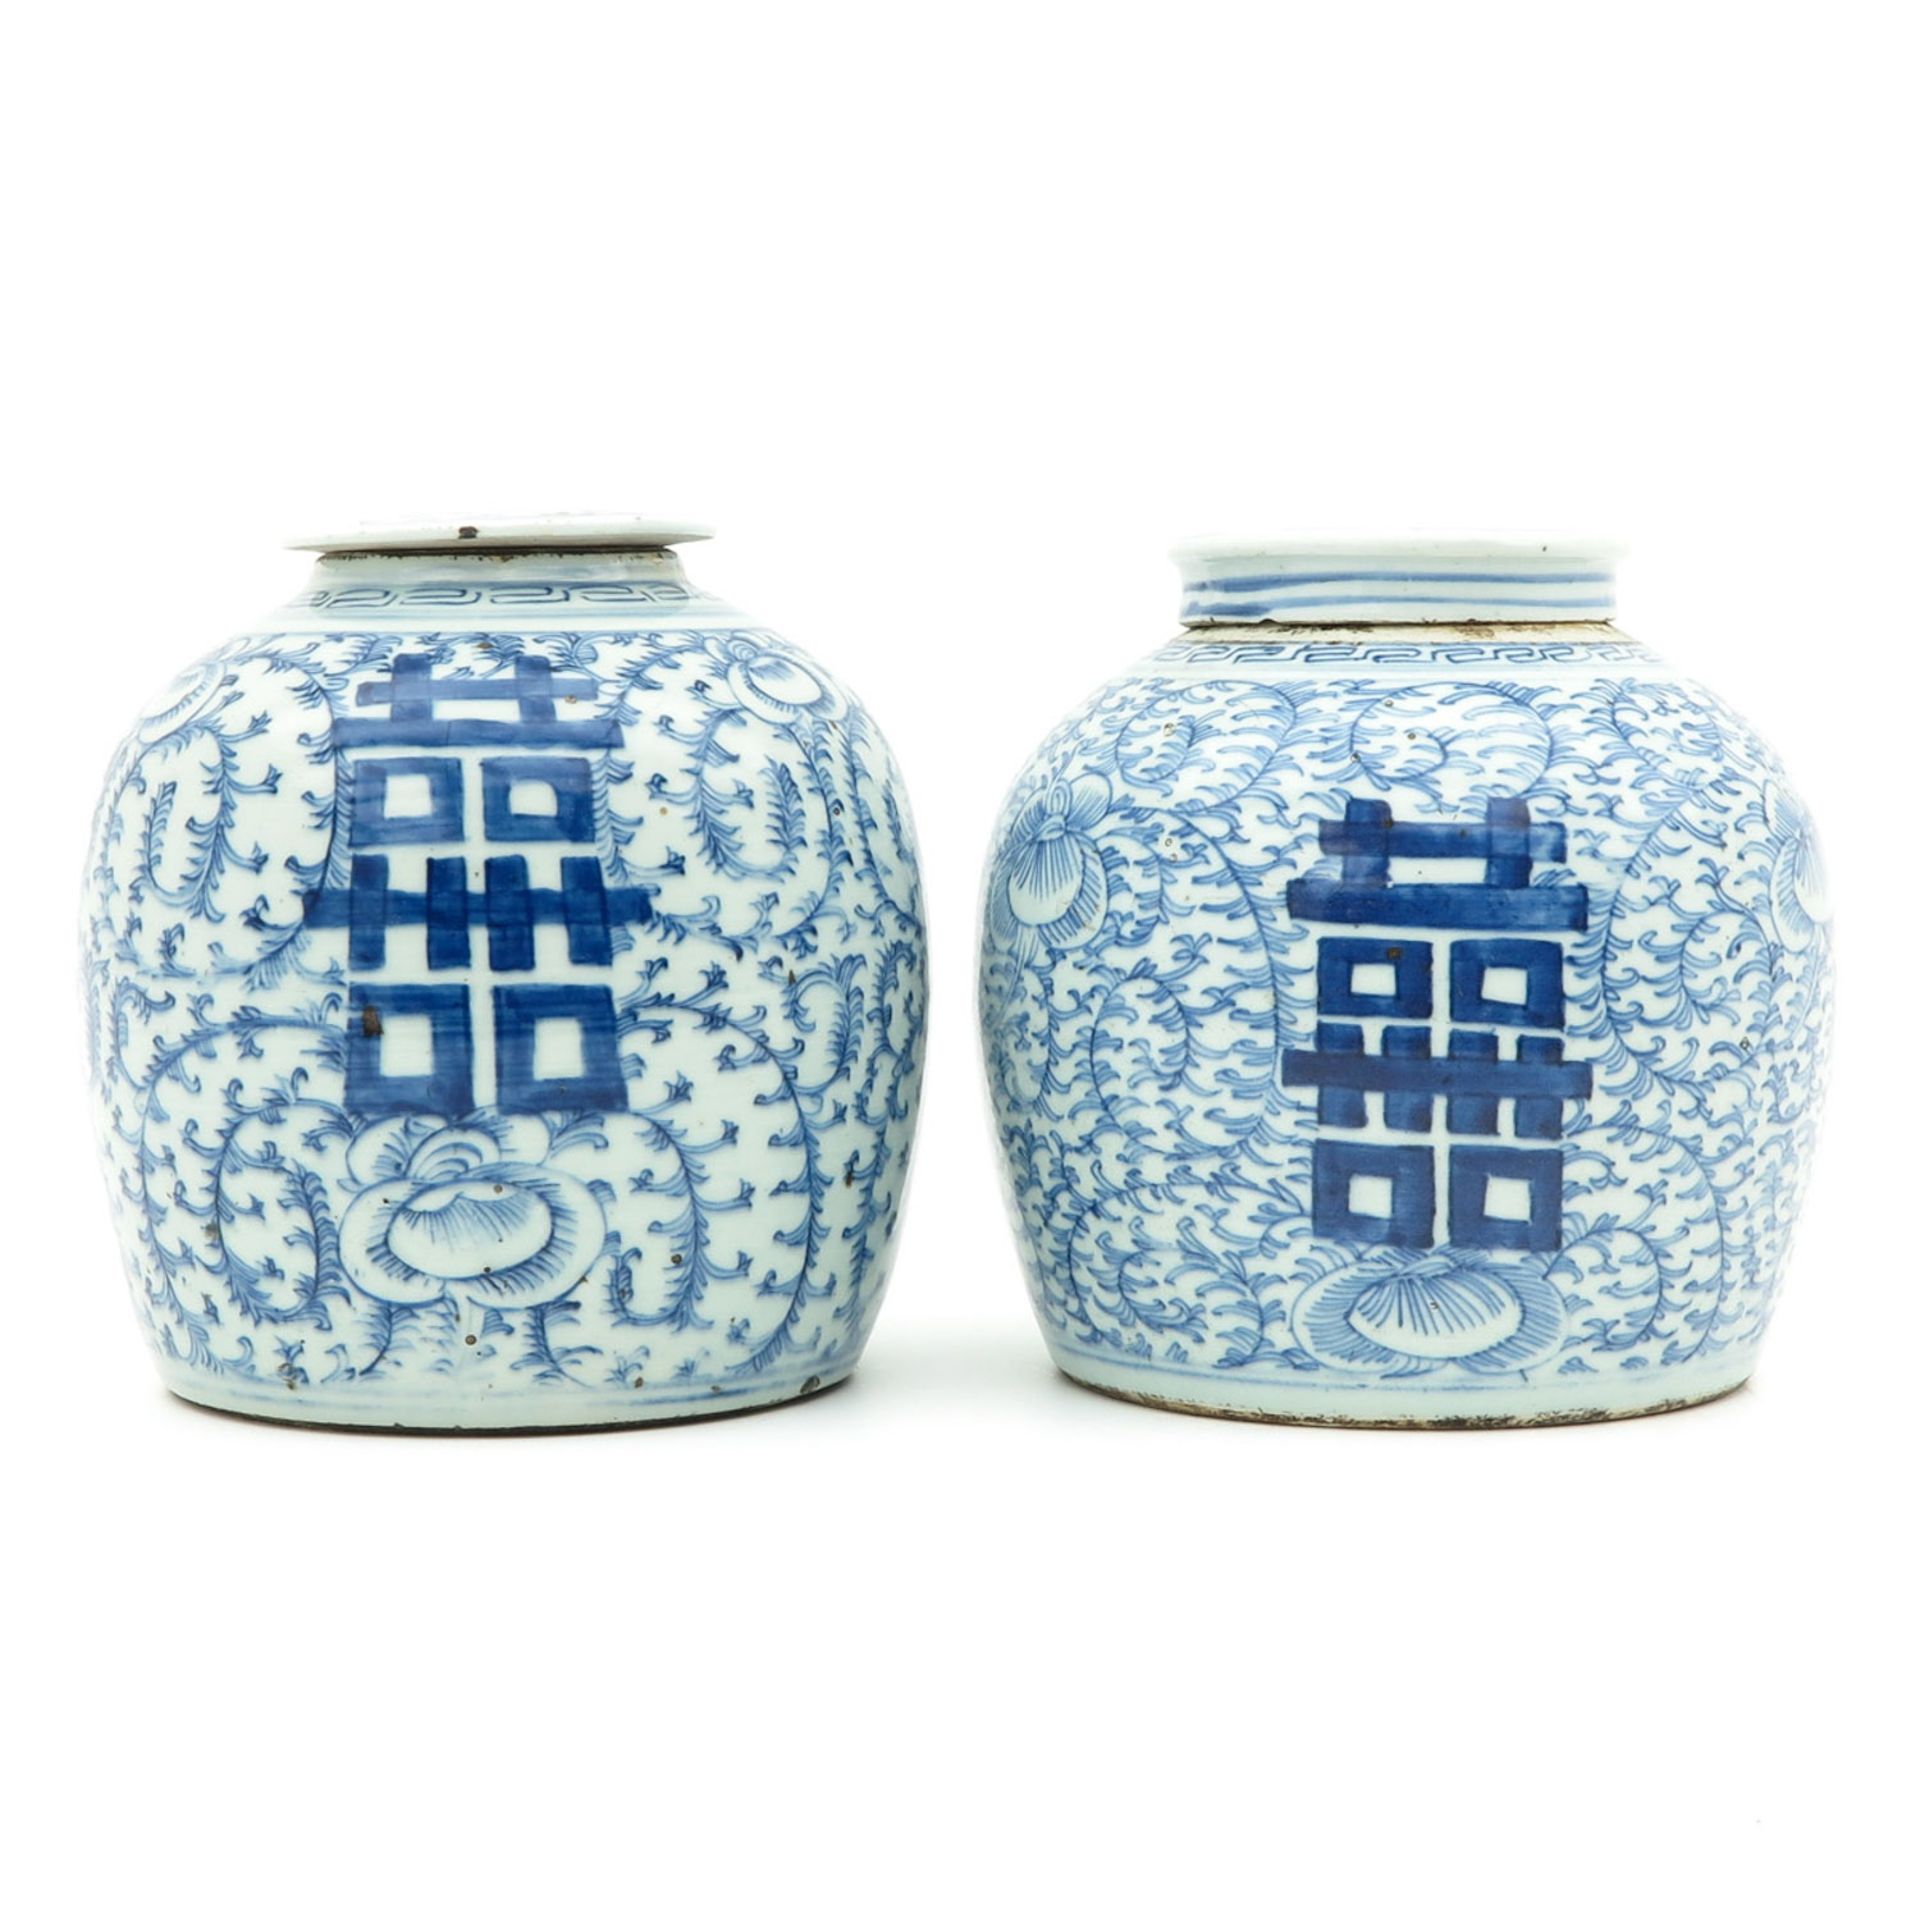 A Pair of Ginger Jars - Image 3 of 10